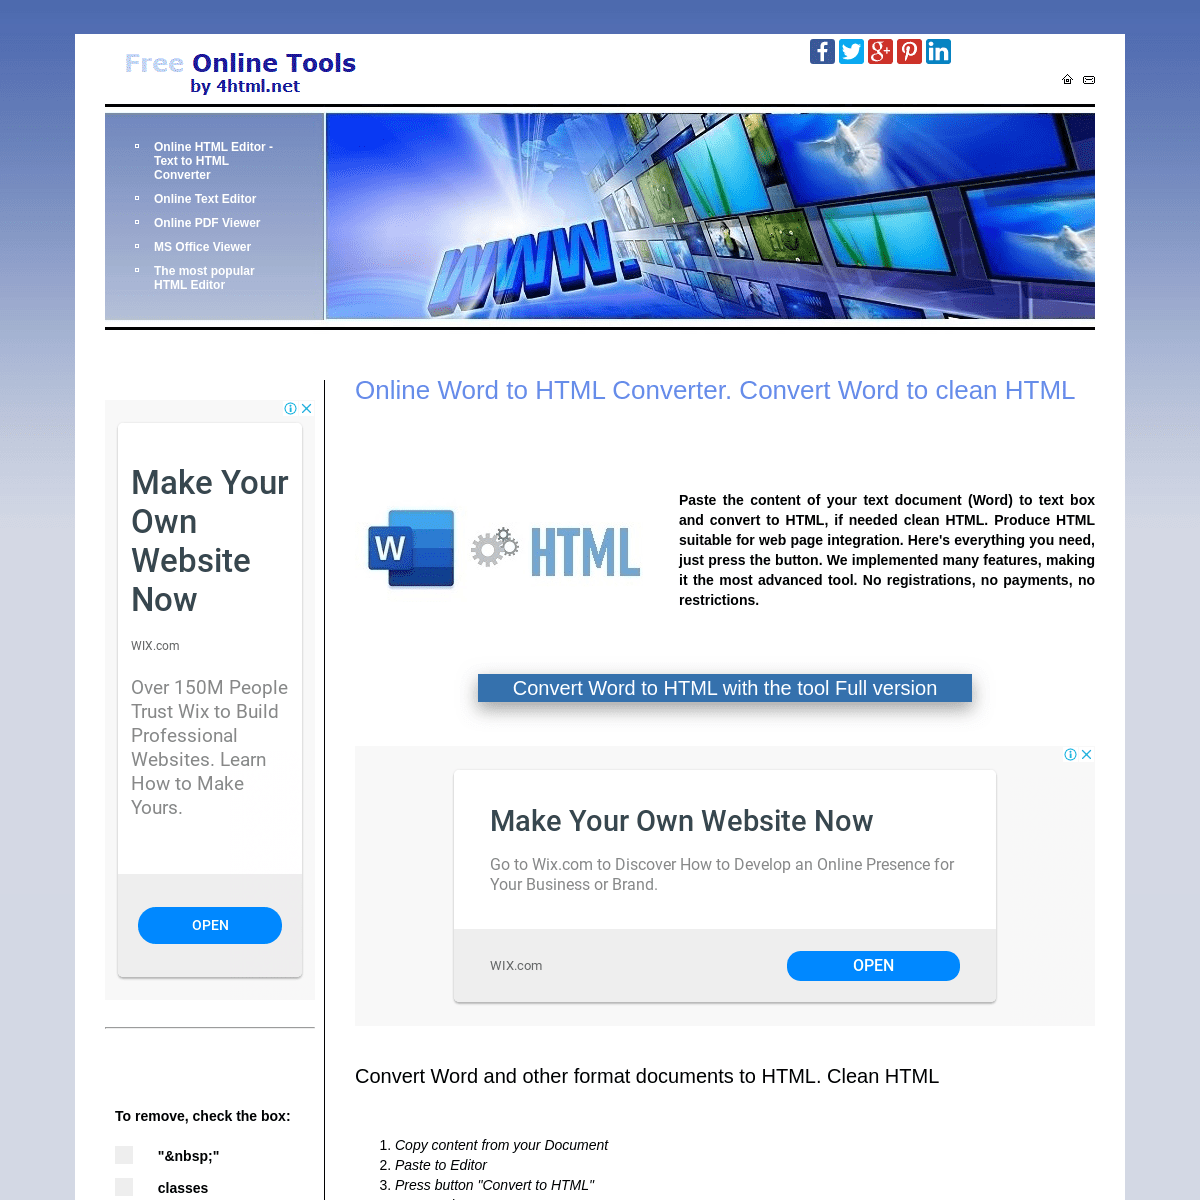 A complete backup of 4html.net